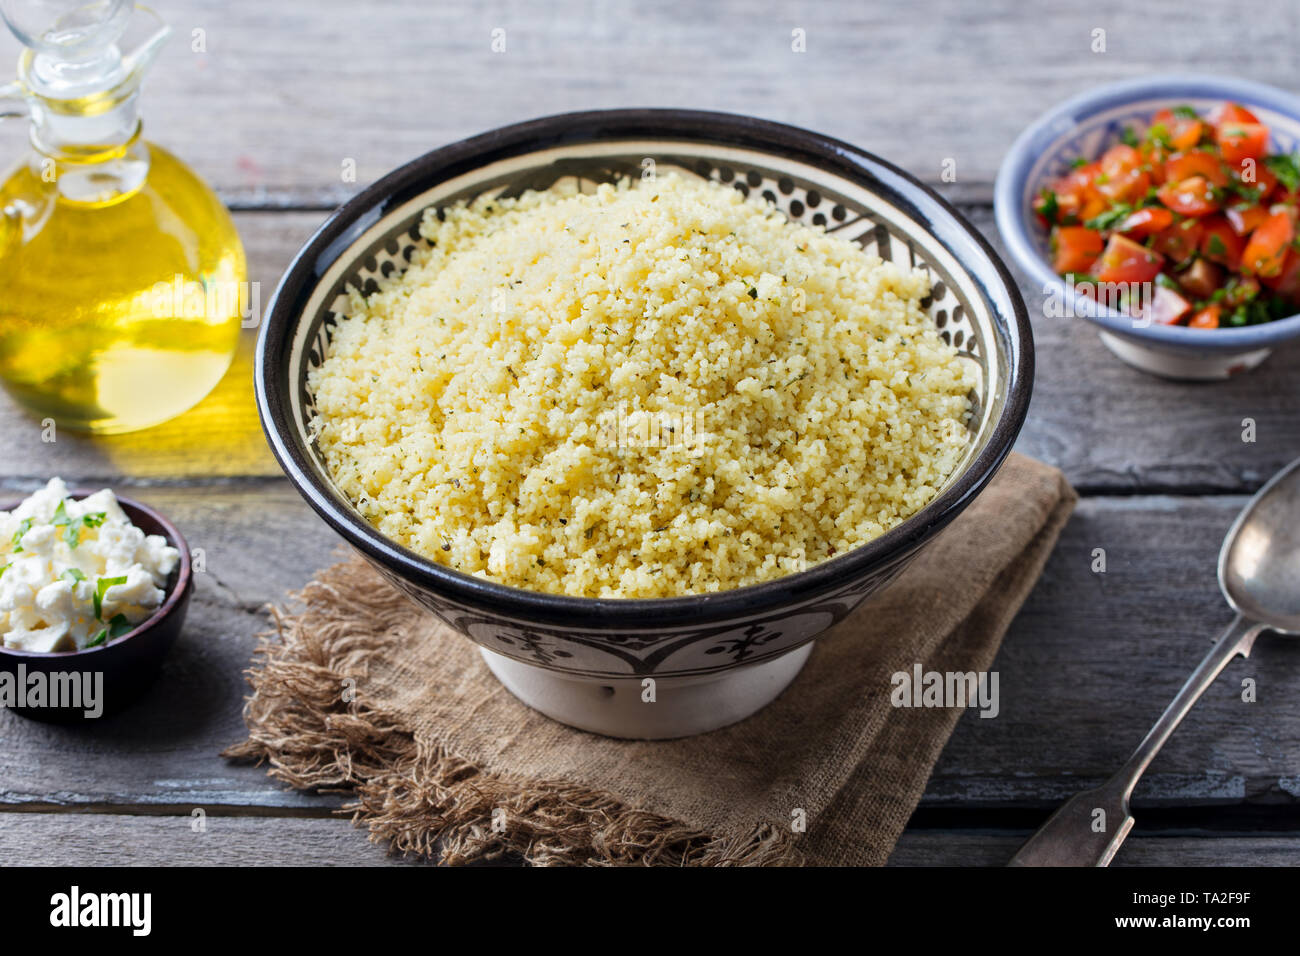 Couscous in bowl with olive oil. Wooden background. Close up. Stock Photo